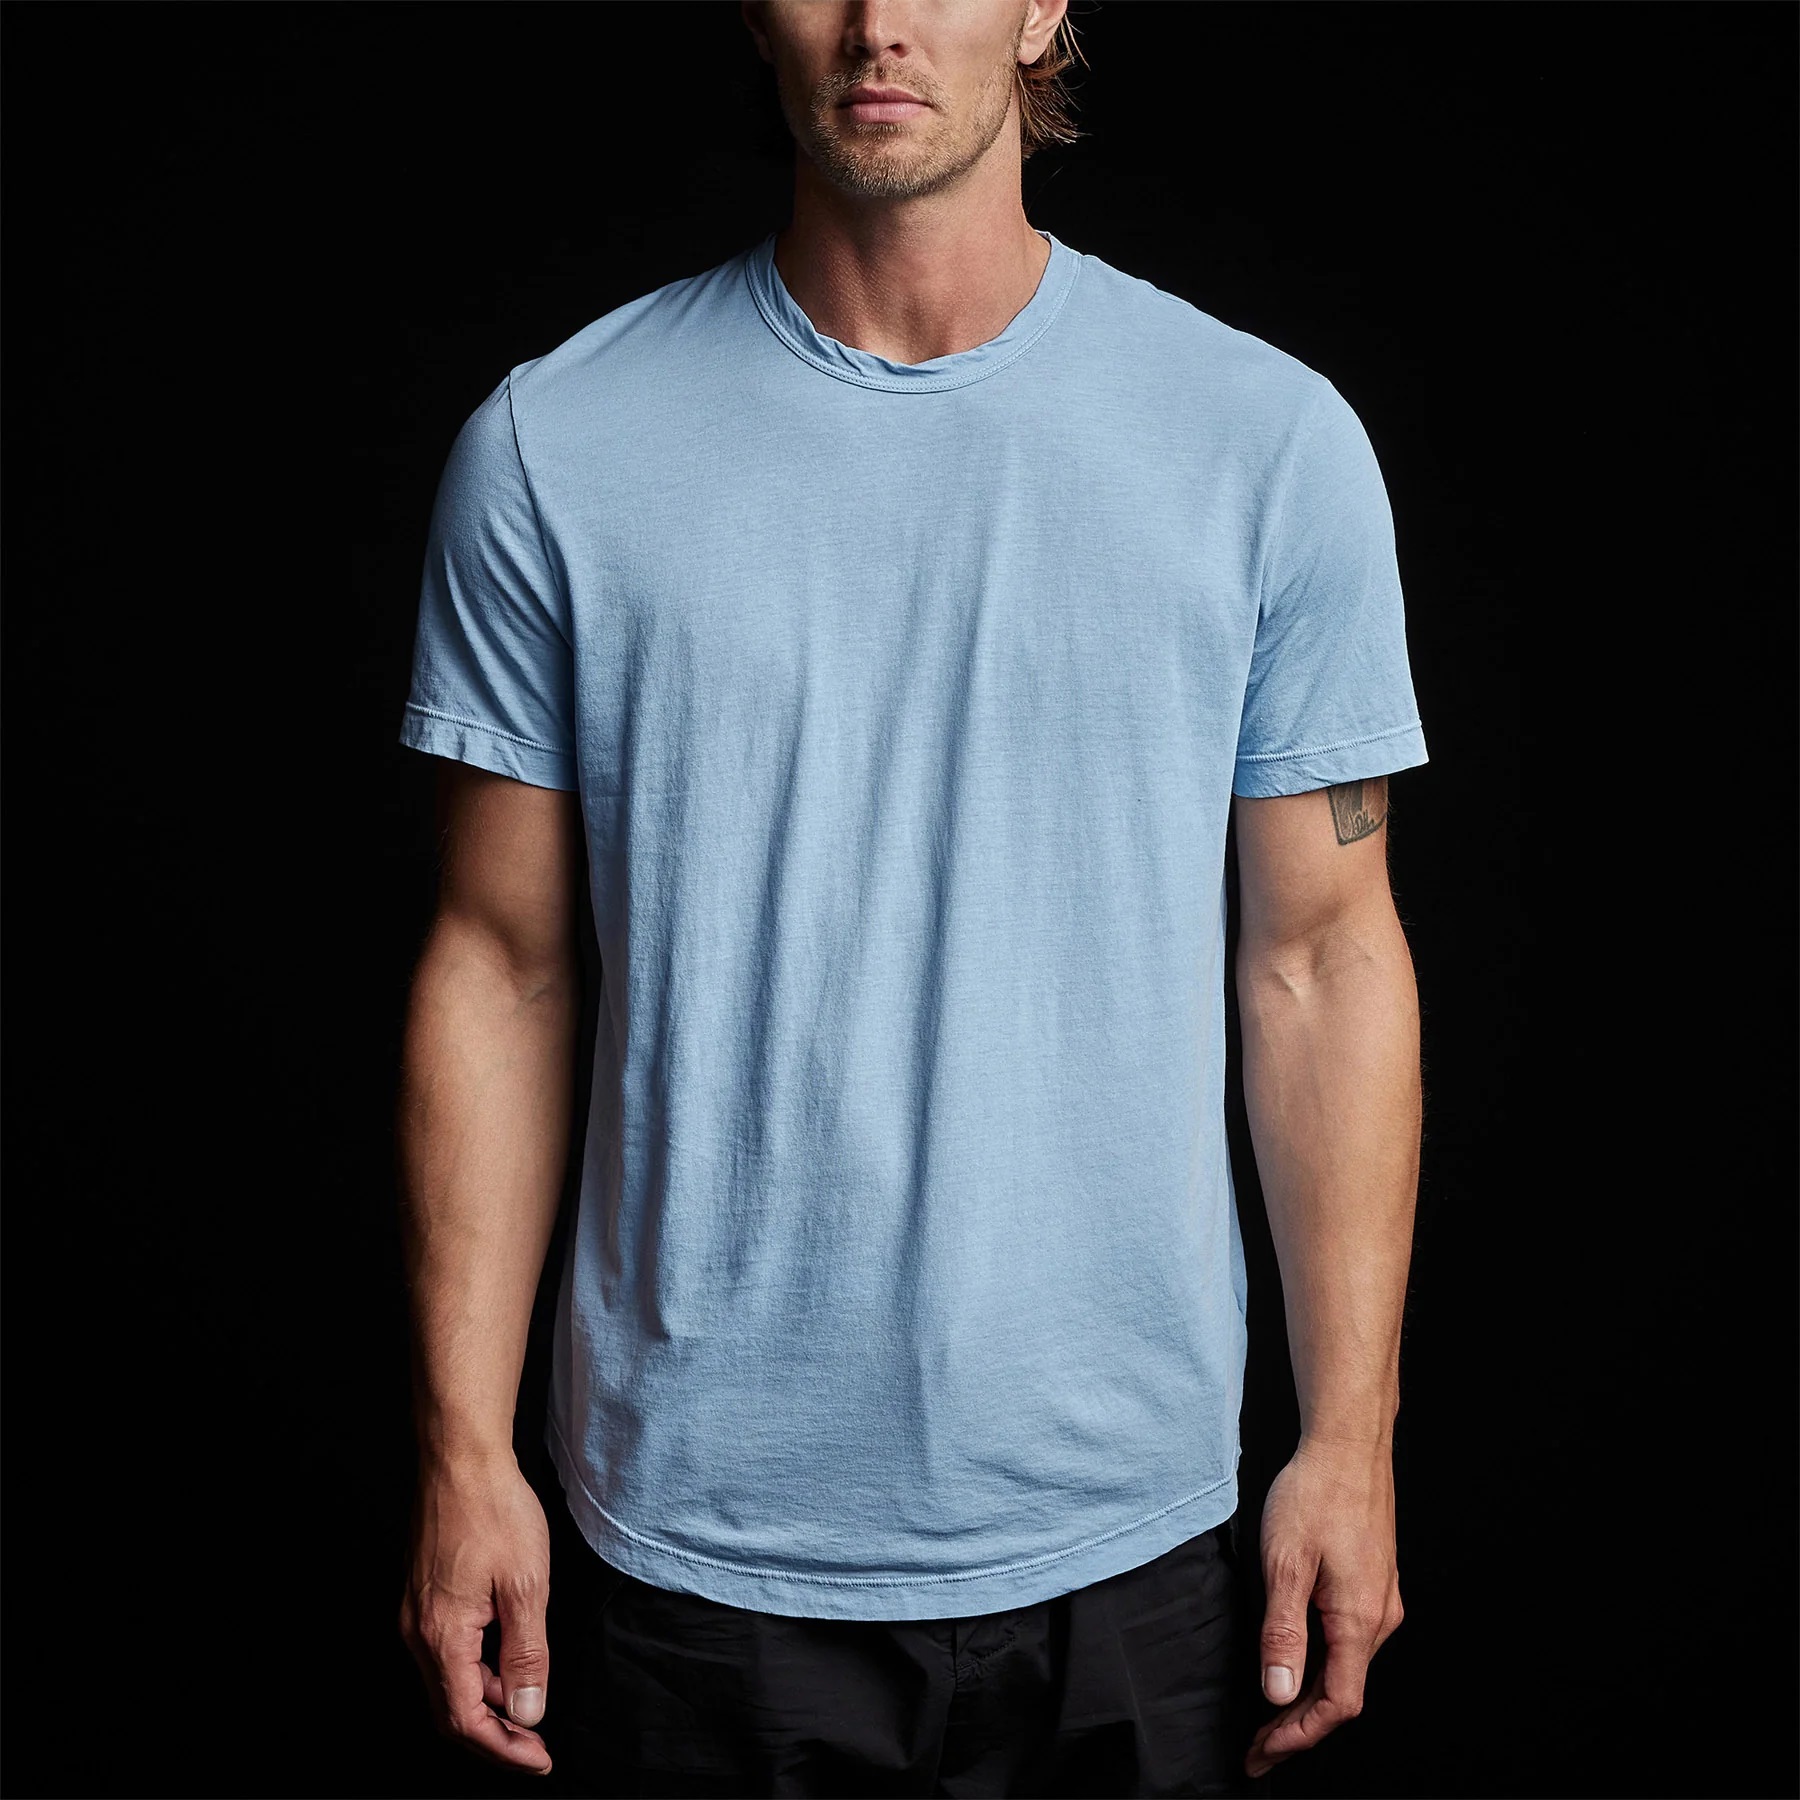 JAMES PERSE Clear Jersey Crew Neck in Light Blue S/1